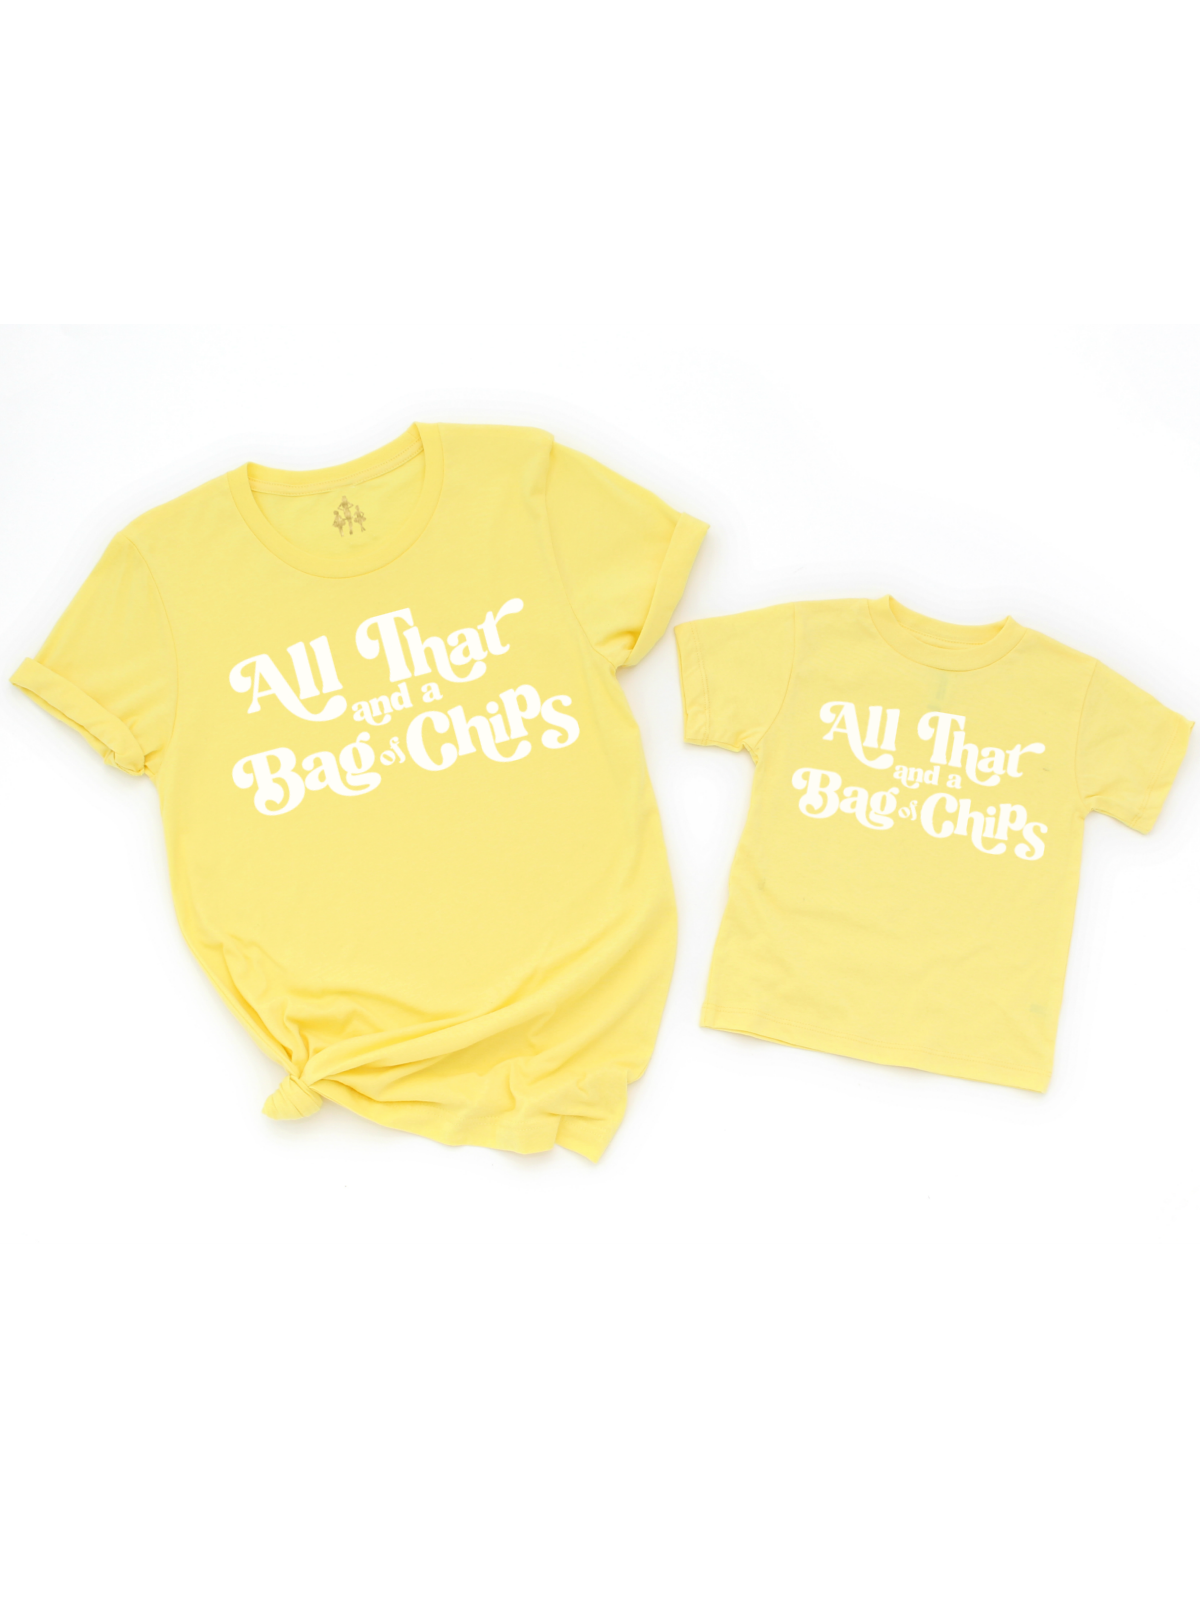 All That and a Bag of Chips Matching Mommy and Me Shirts Set - Yellow